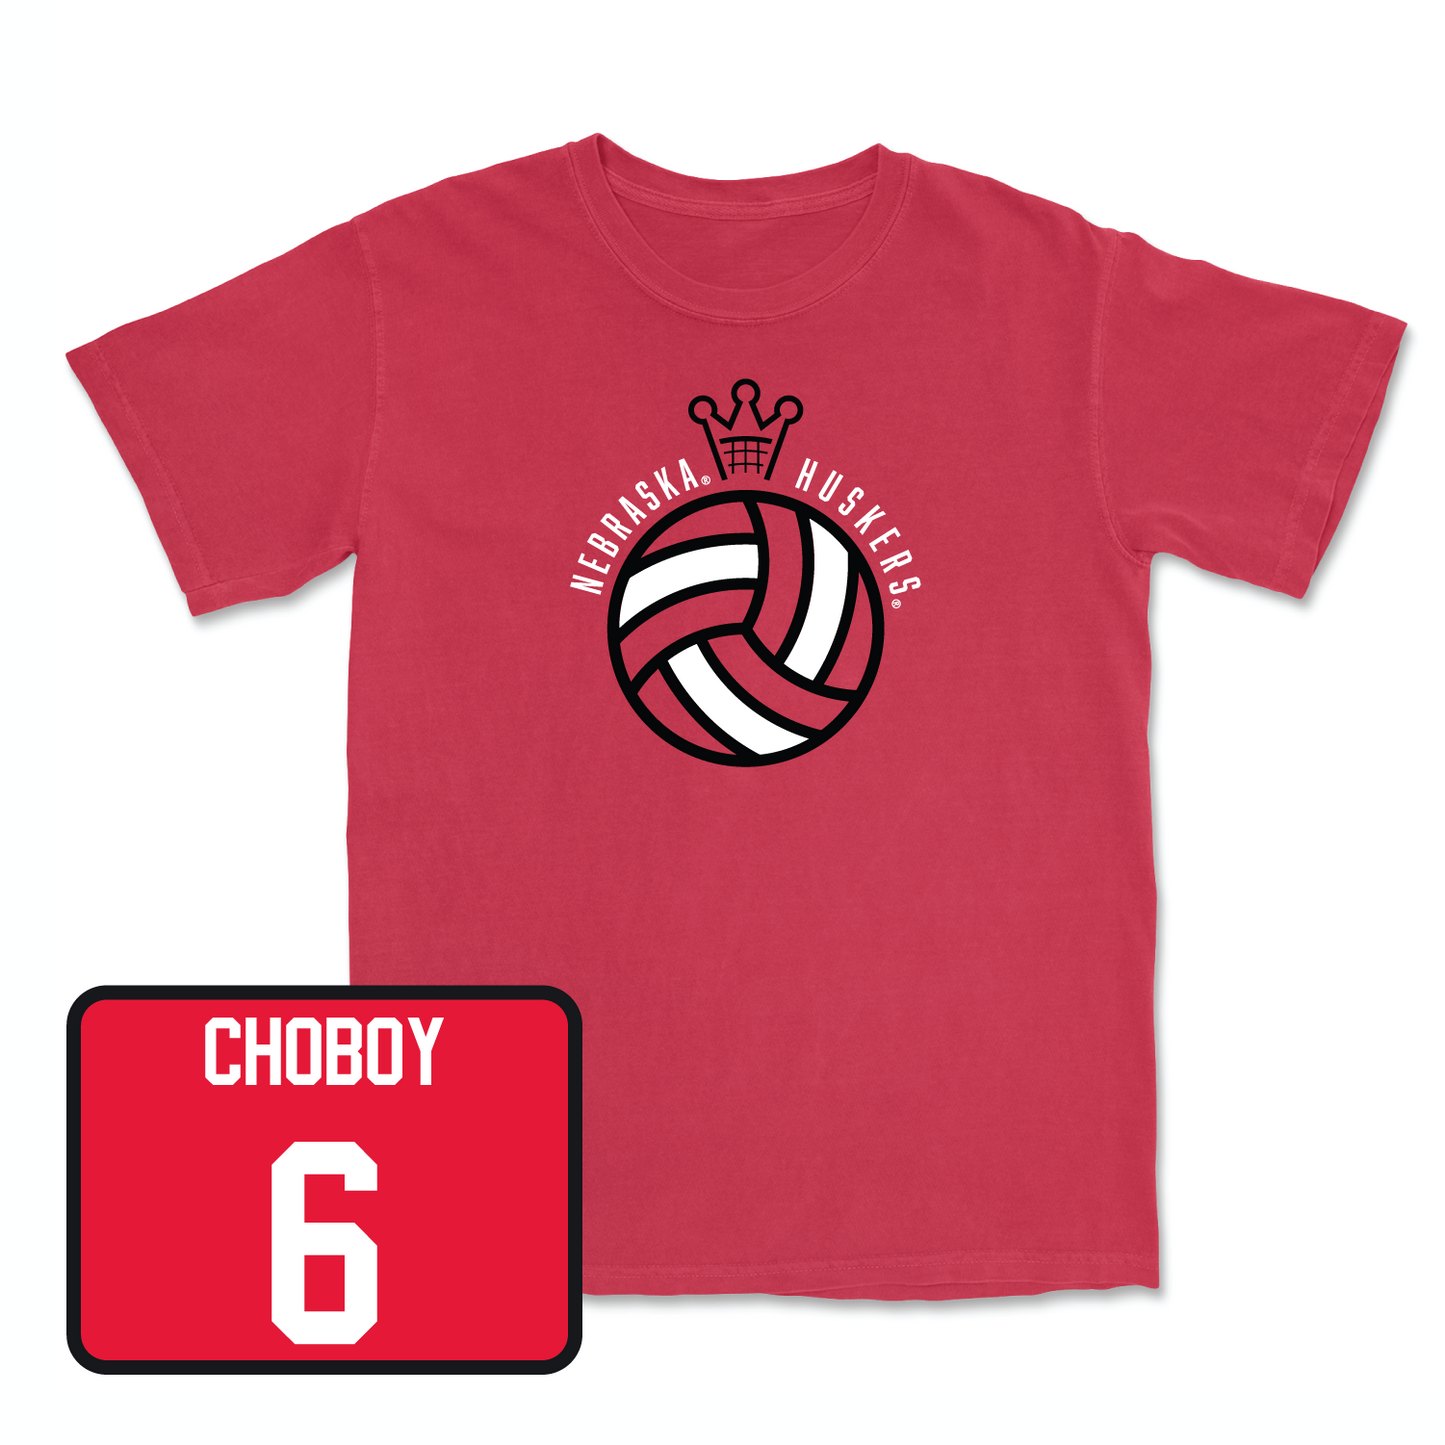 Red Women's Volleyball Crown Tee X-Large / Laney Choboy | #6